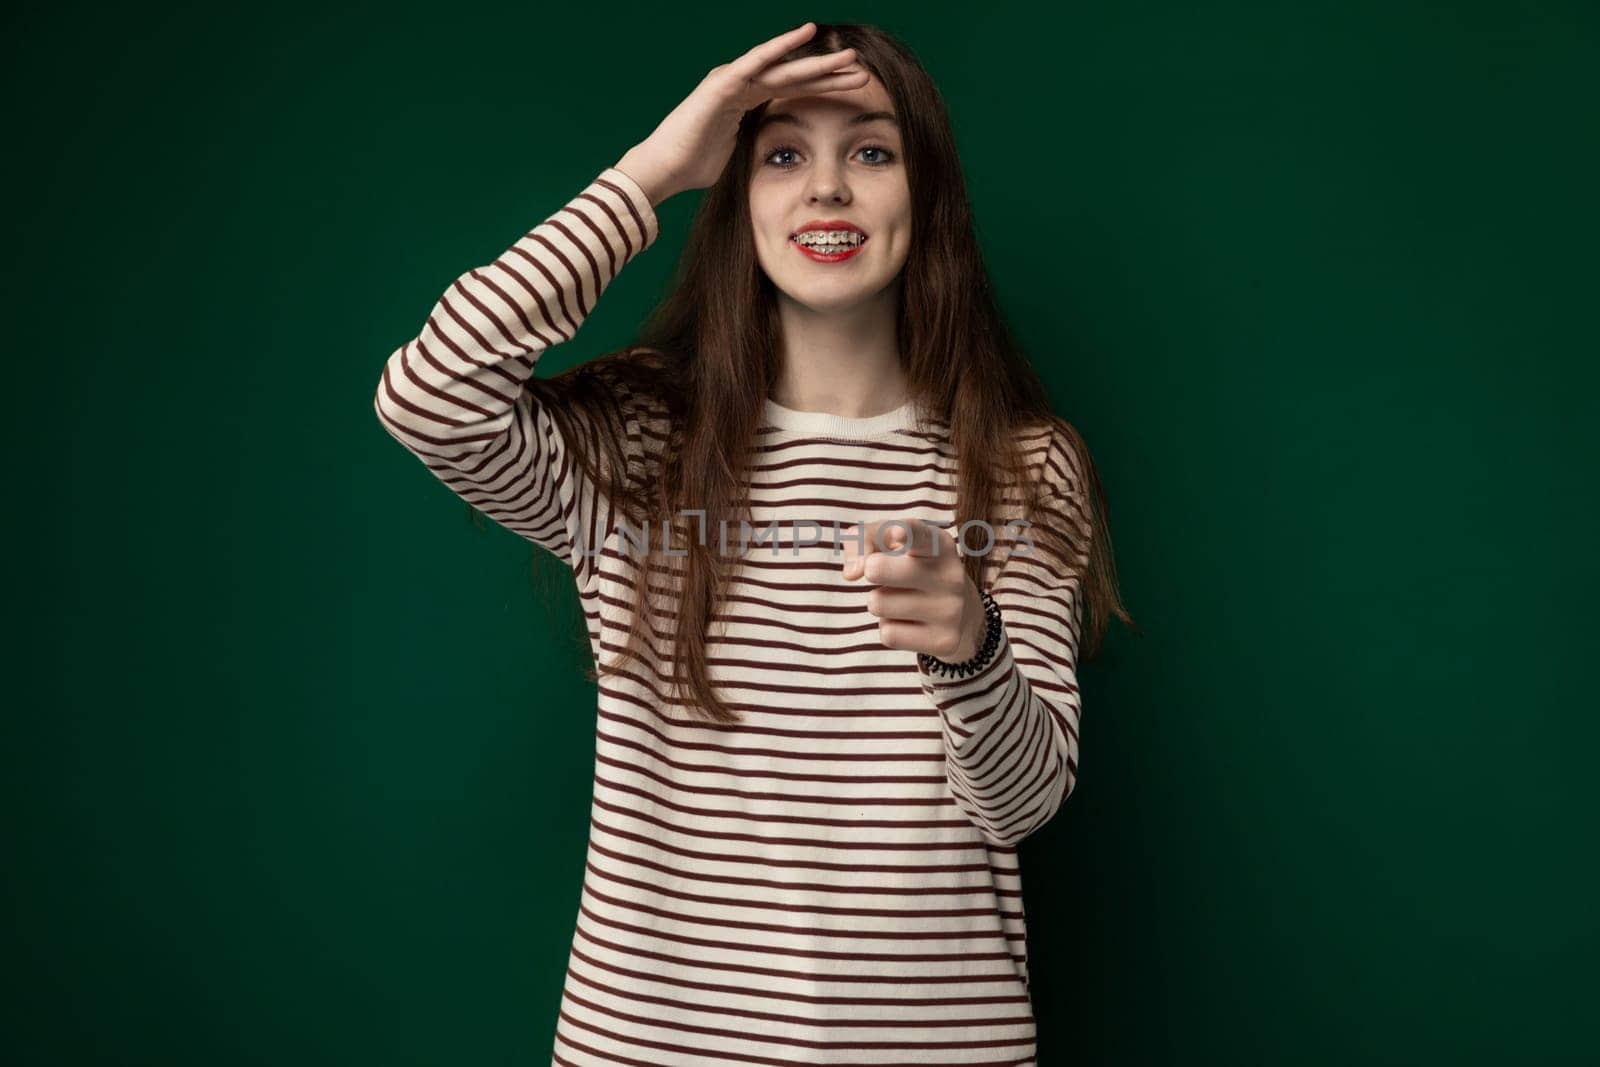 A woman wearing a striped shirt is shown in distress as she holds her head with her hands, indicating she may be experiencing a headache or stress.